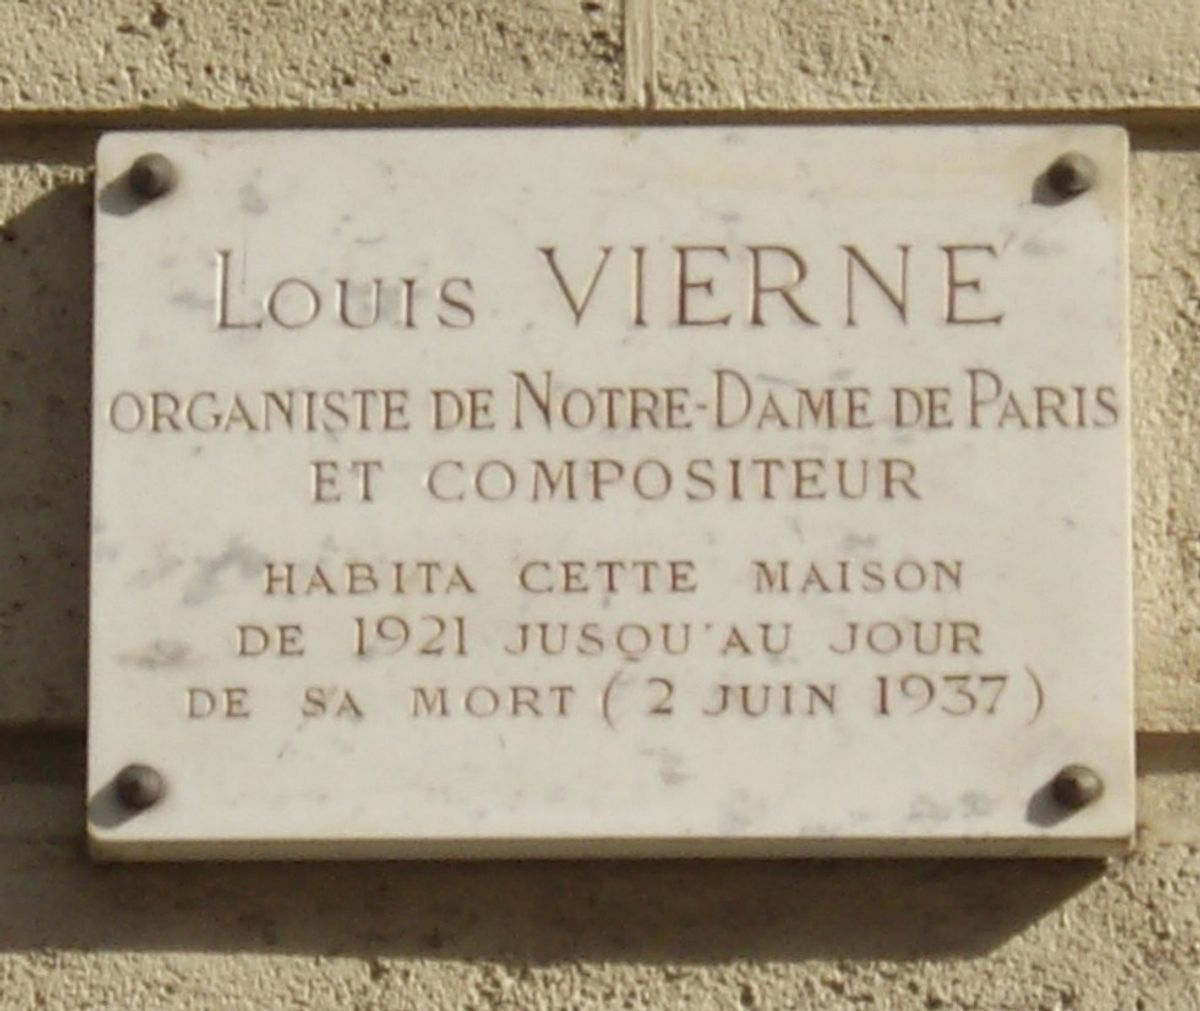 The Most Epic Death In Music History: Louis Vierne